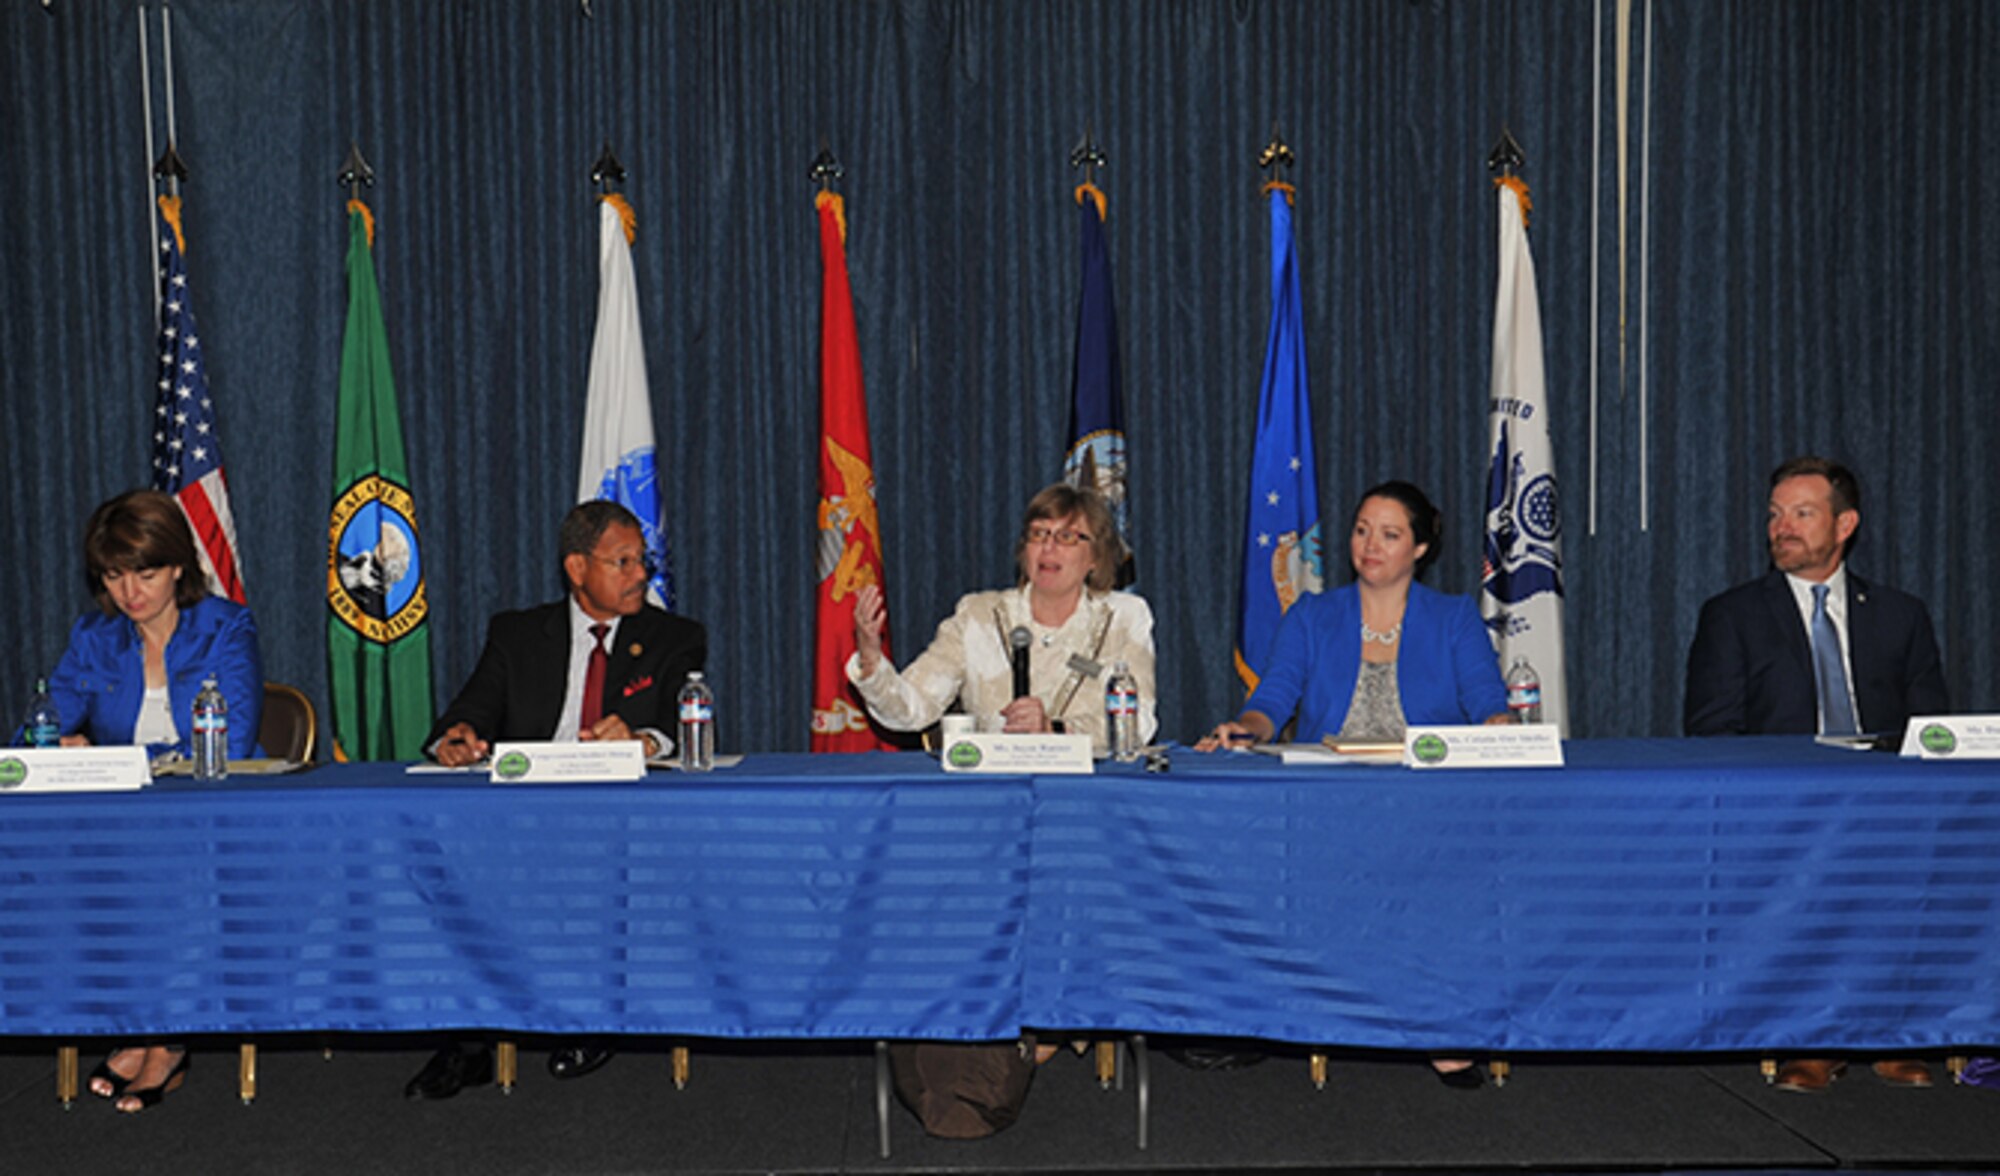 Panel members answer questions during a Military Family Summit, Aug. 18, 2016, at the Red Morgan Center at Fairchild Air Force Base, Wash. The summit gave Active Duty, Guard and Reserve service members and their families from all branches to address key issues affecting military families, including basic allowance for housing, employment opportunities and education for special needs children. (U.S. Air Force photo/Staff Sgt. Samantha Krolikowski) 